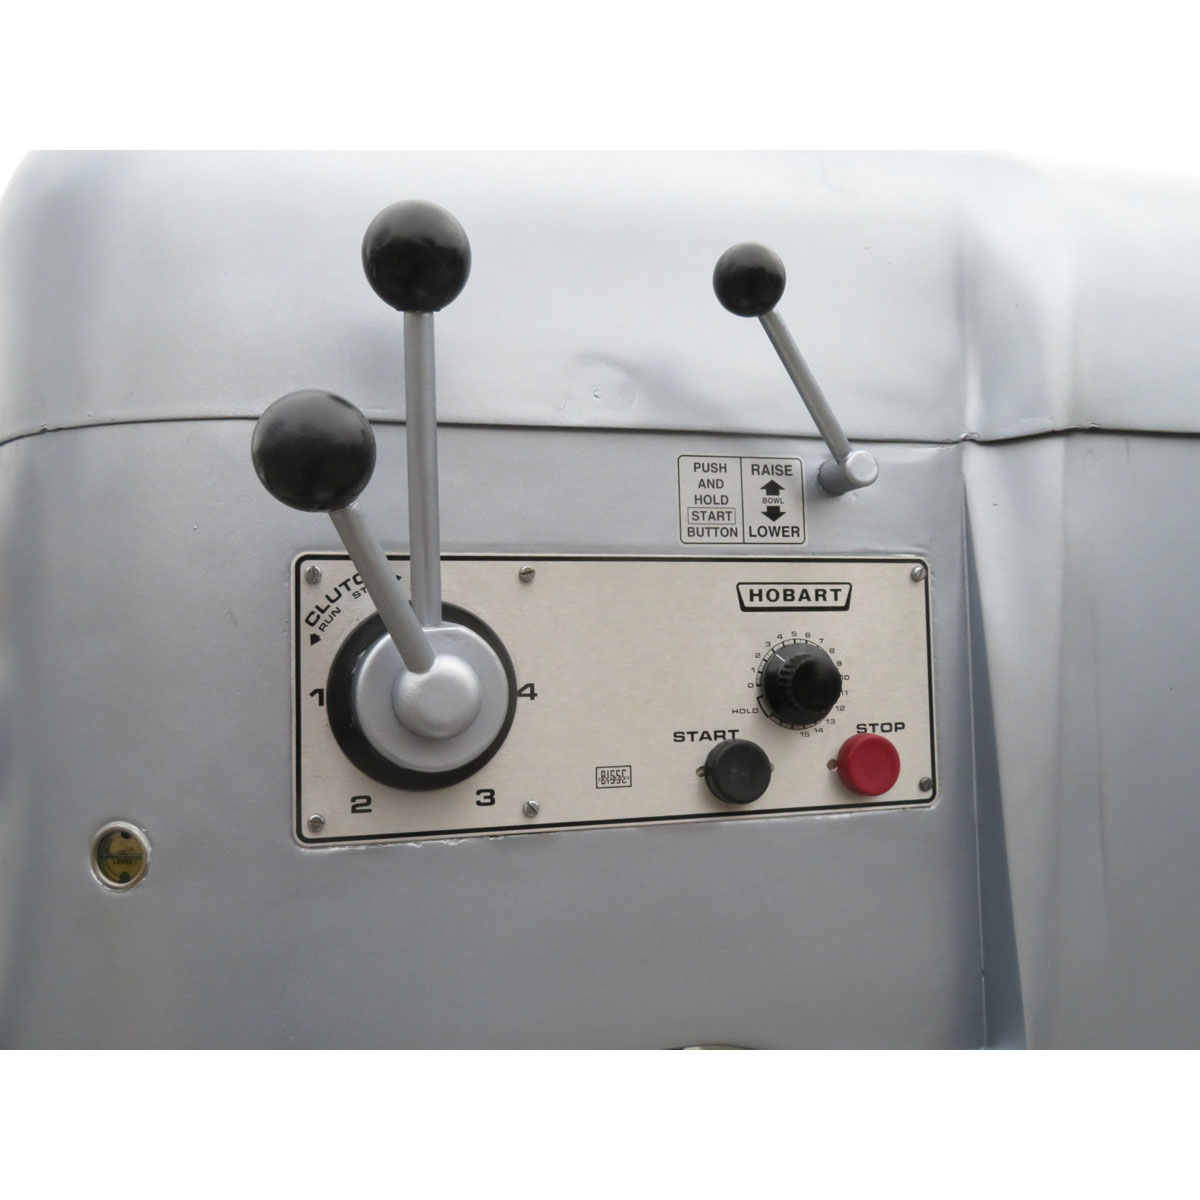 Hobart 140 Quart V1401 Mixer with Bowl and Chute on Splash Guard, Used Great Condition image 4